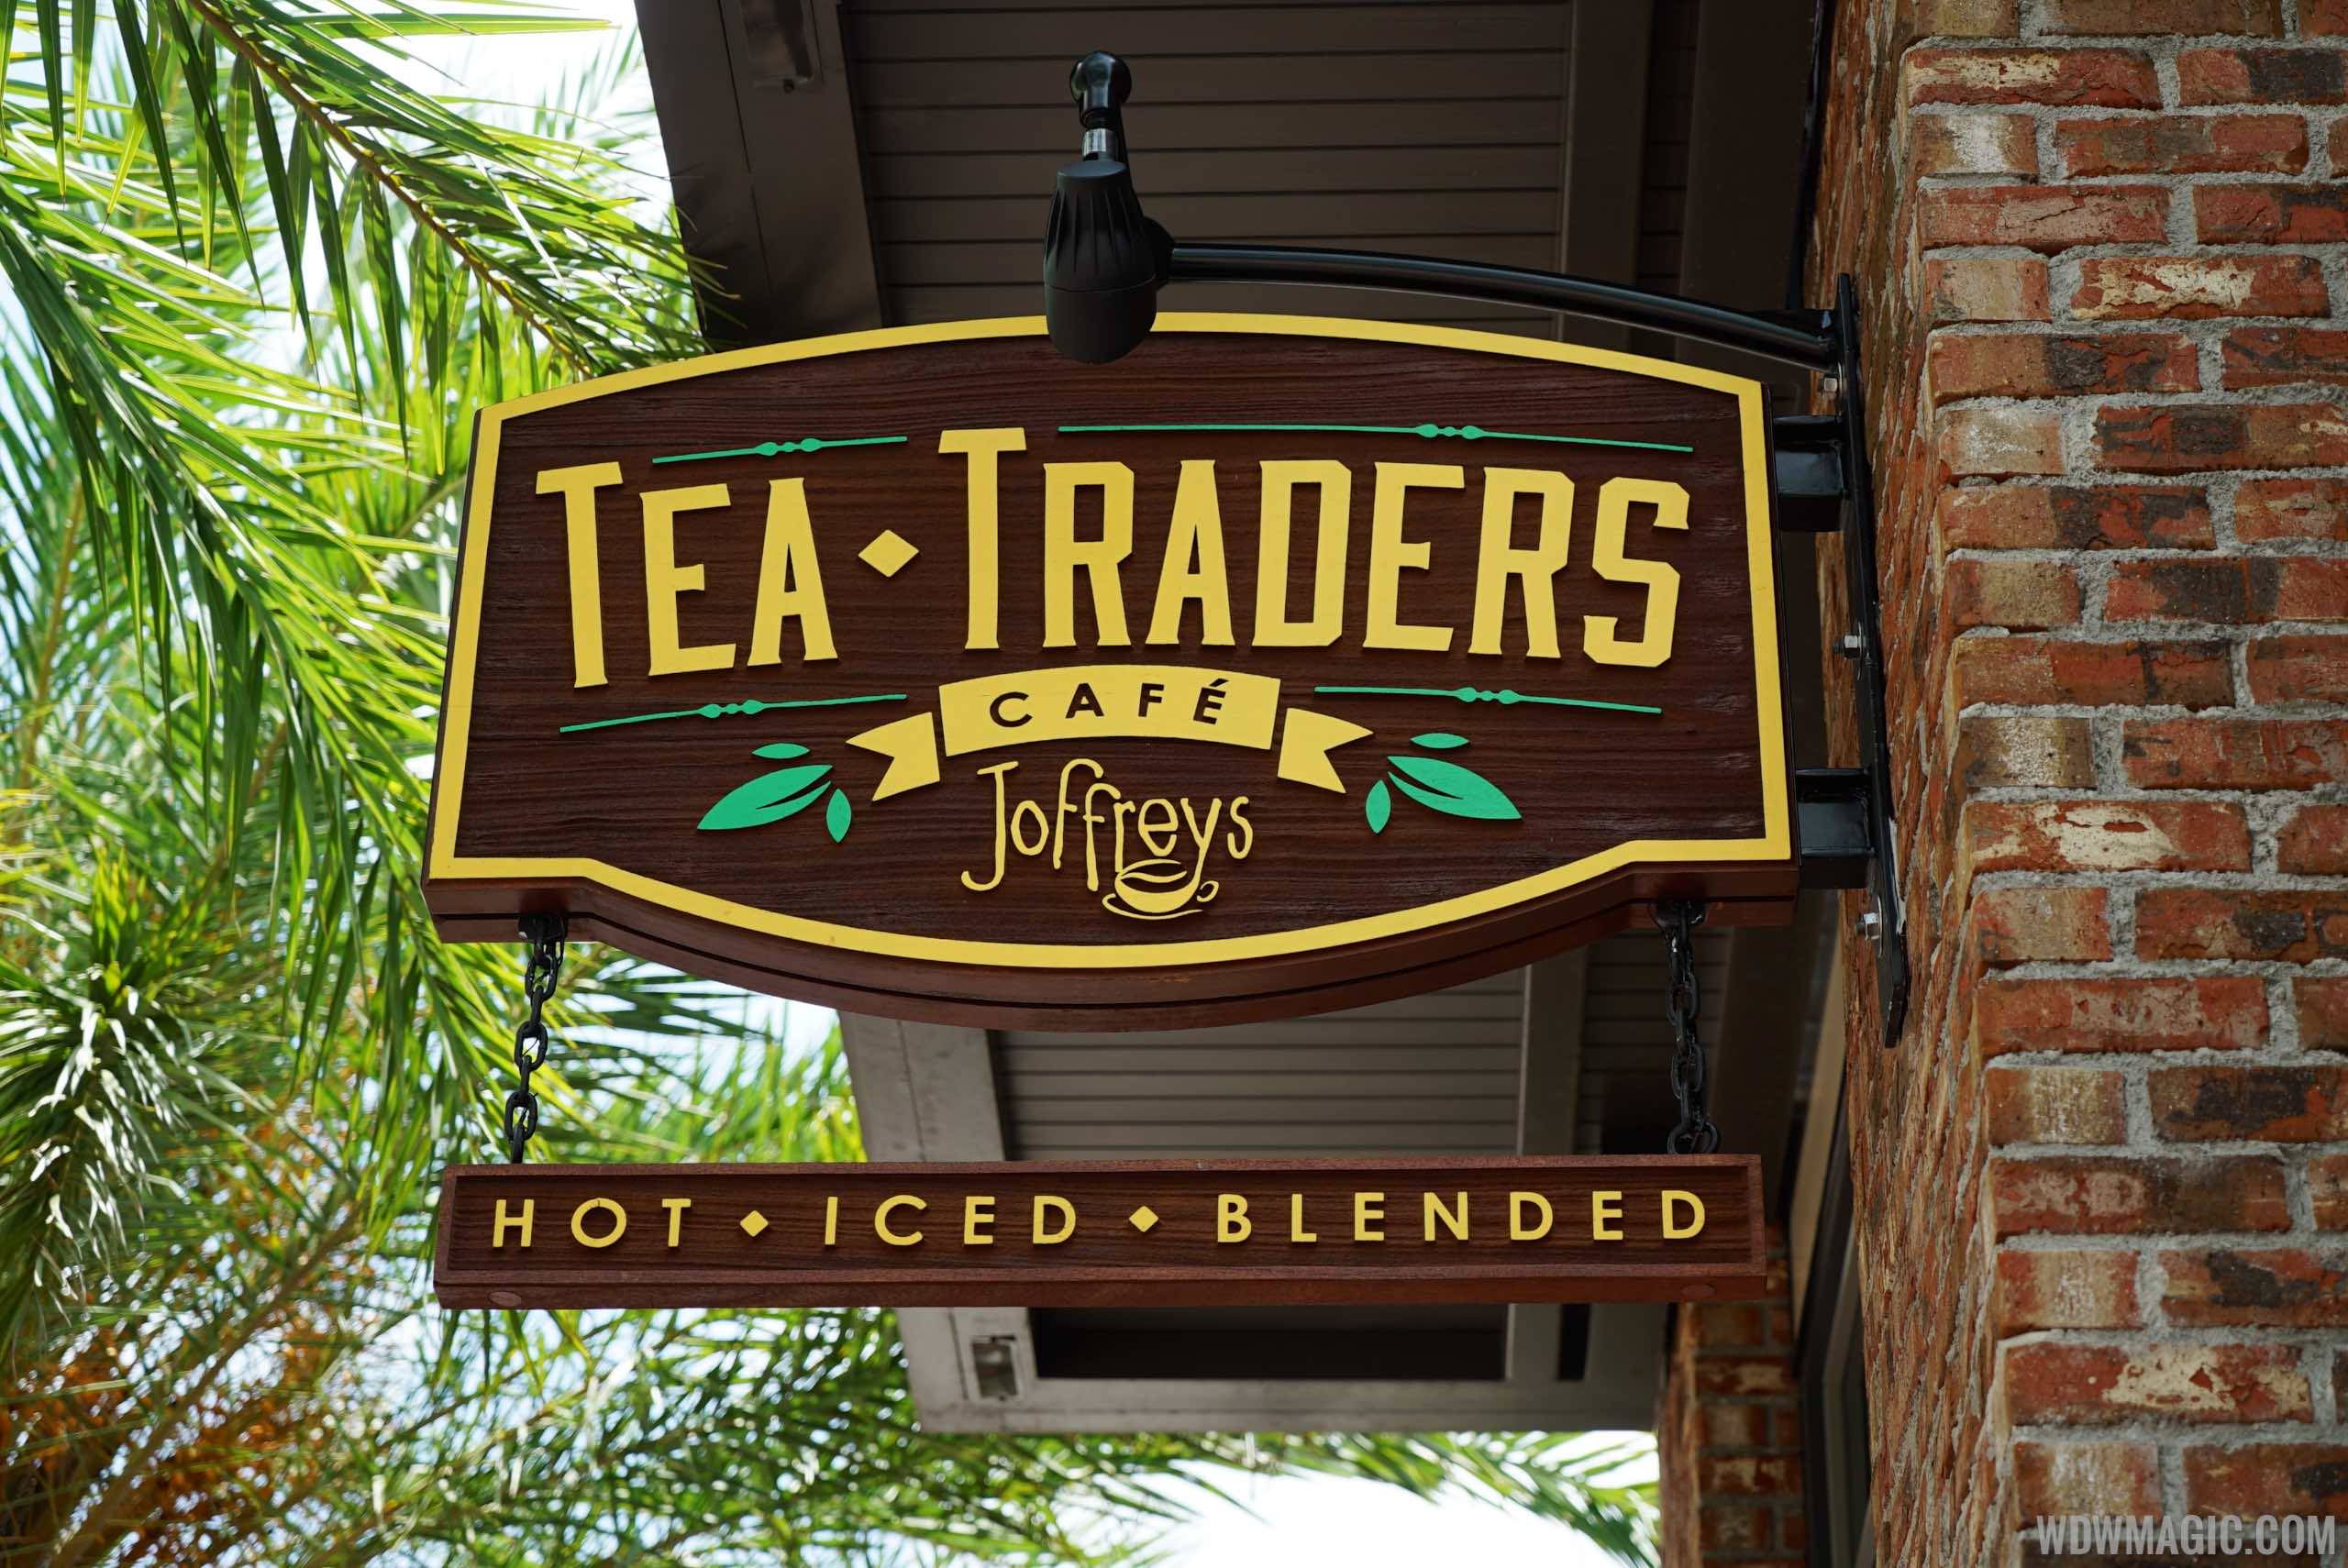 The Tea Traders Cafe overview